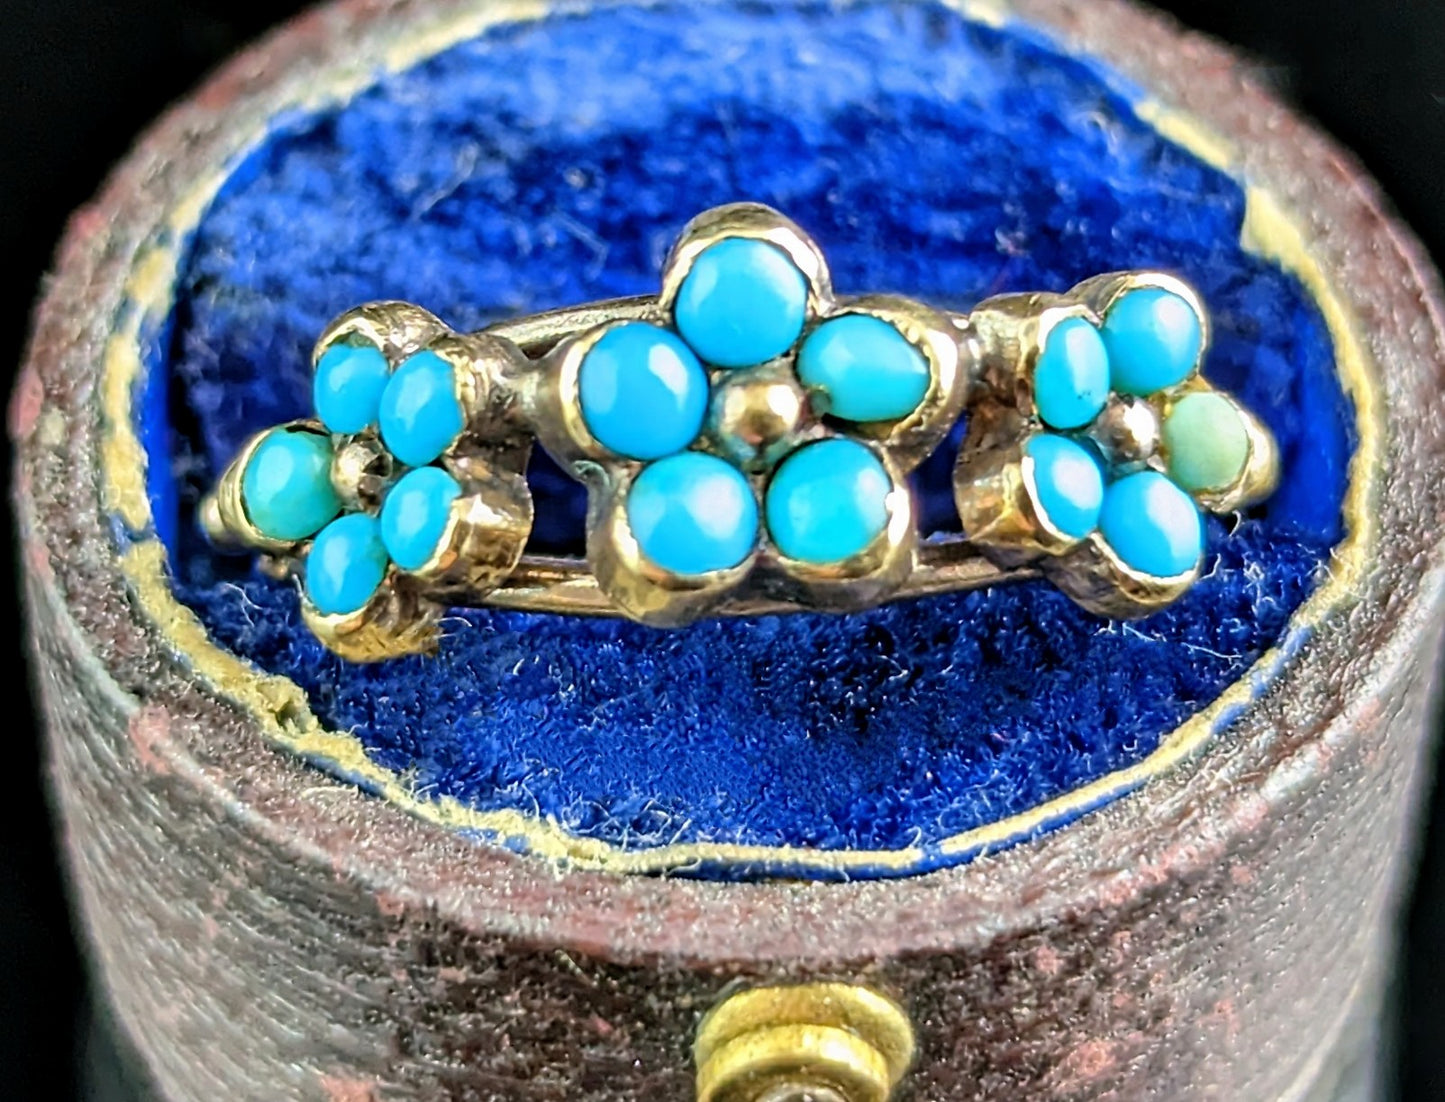 Antique Georgian triple flower ring, Forget me not, 18ct gold and Turquoise